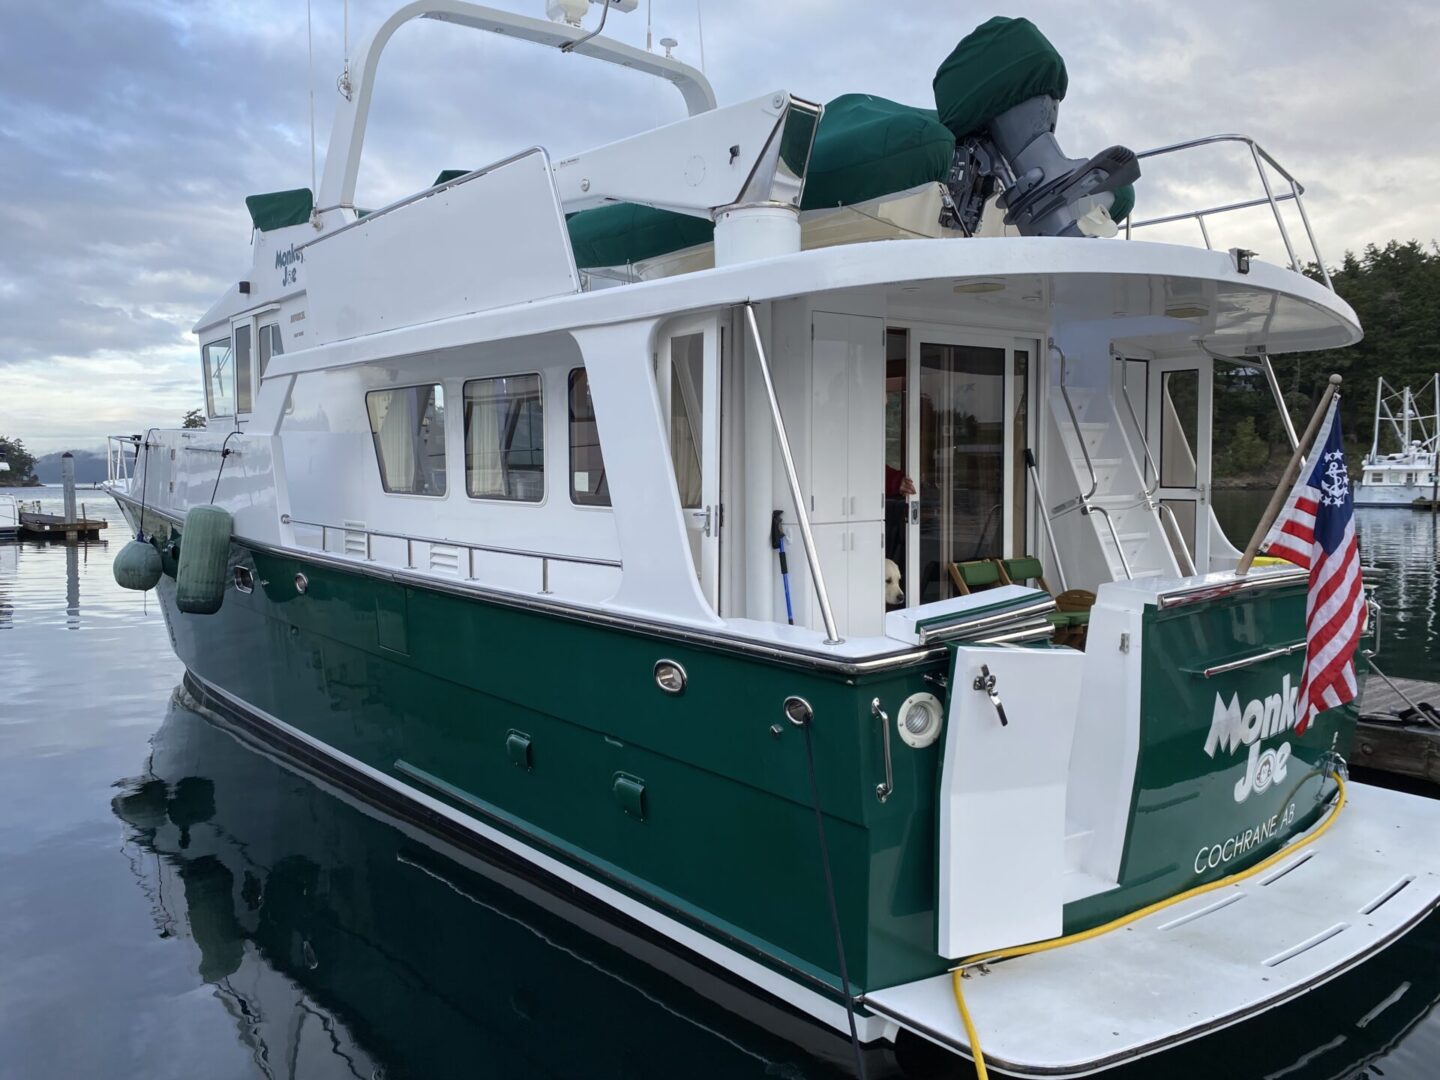 Closeup shot of green and white color boat